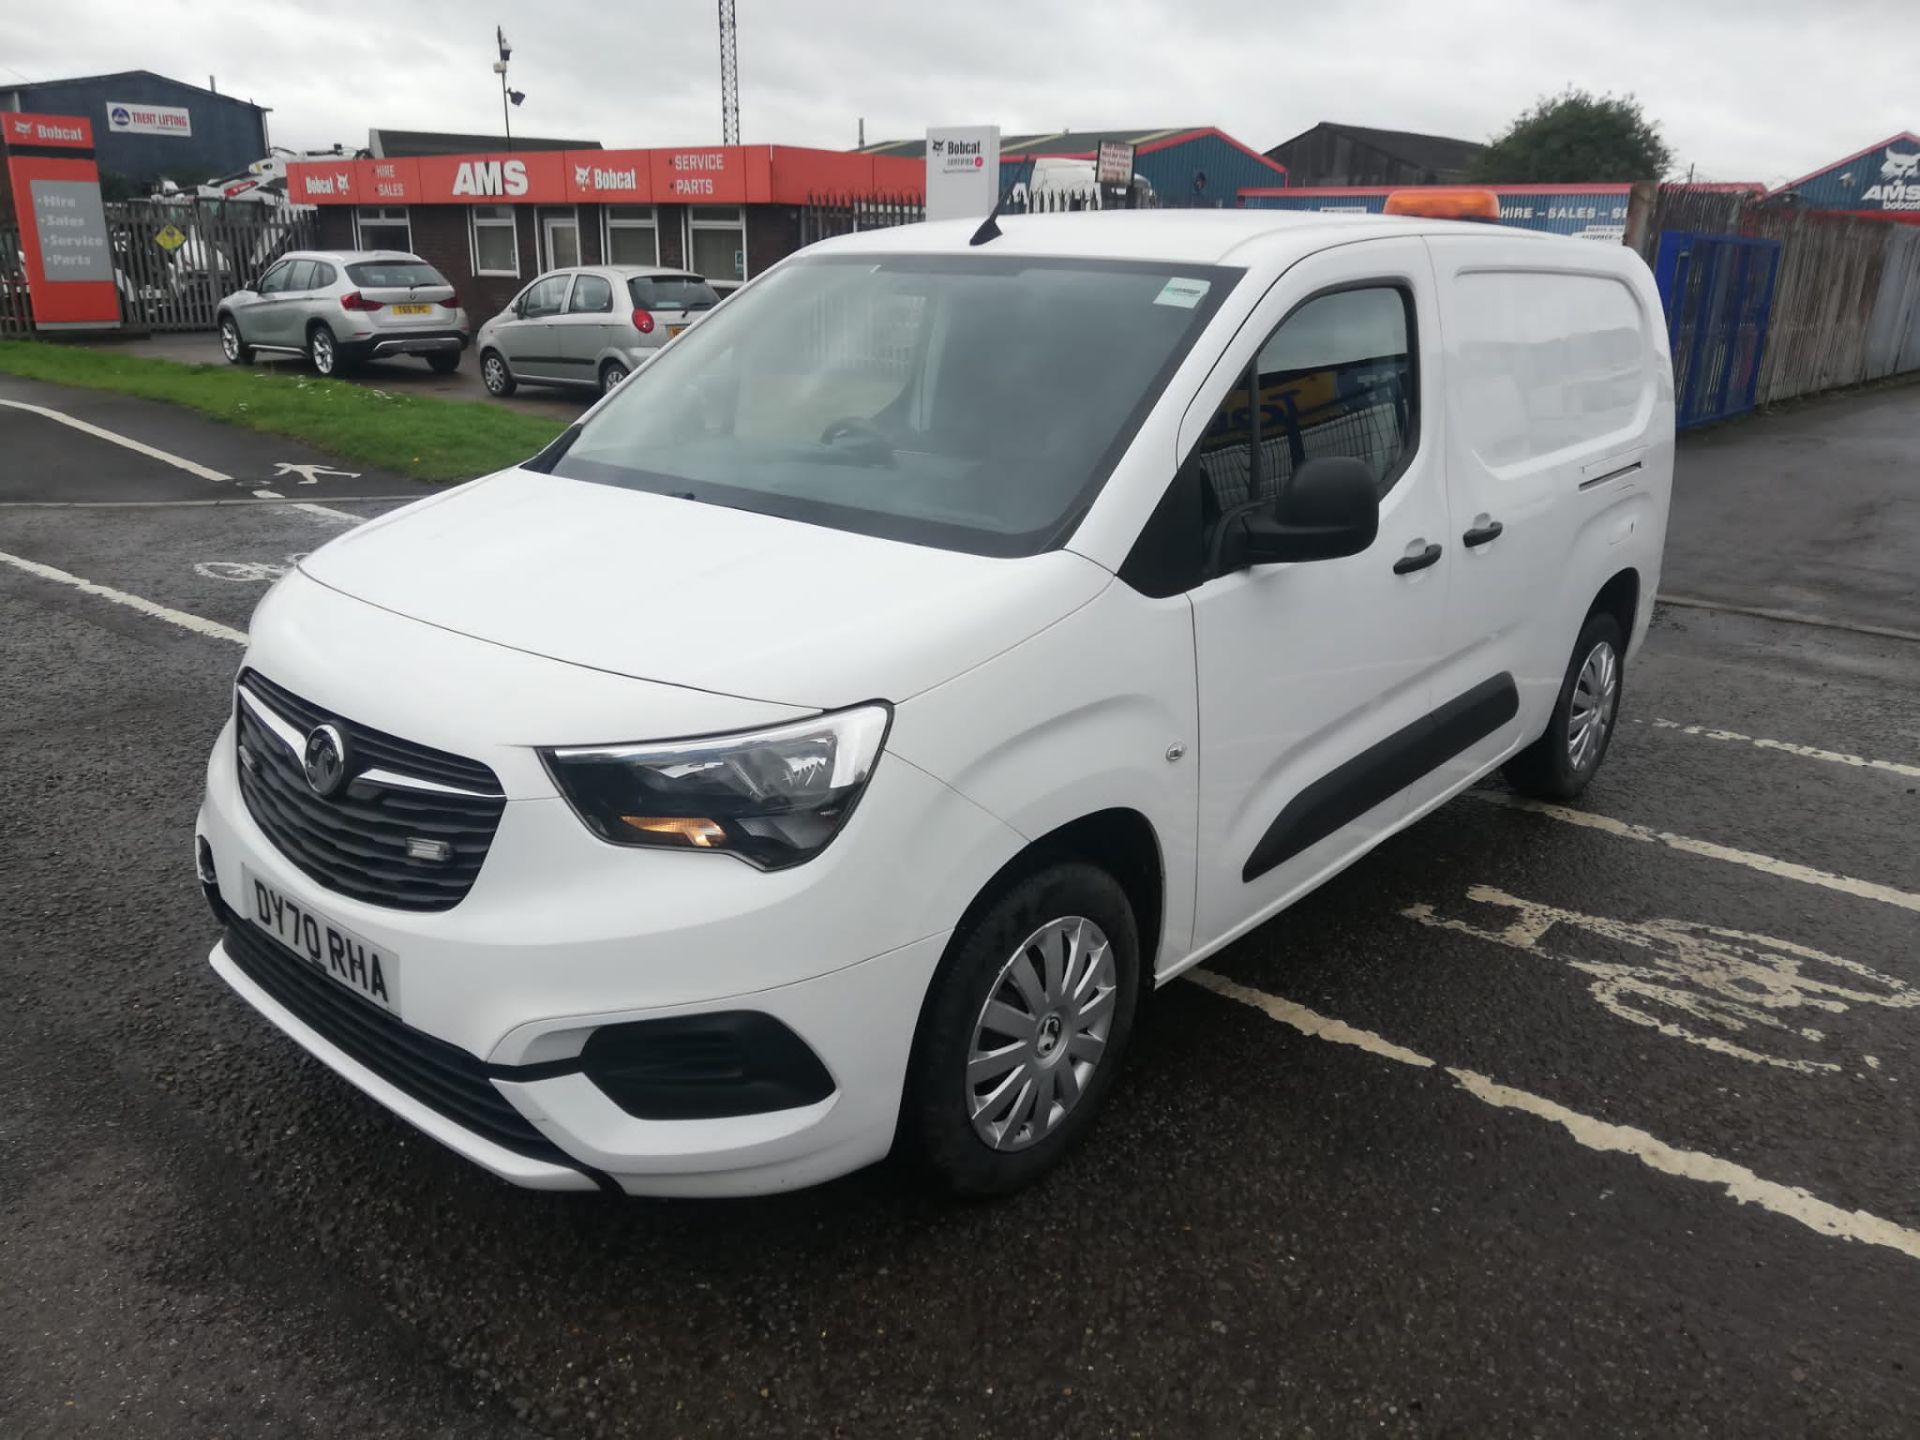 2020 70 VAUXHALL COMBO SPORTIVE LWB PANEL VAN - 48K MILES - AIR CON - PLY LINED - Image 3 of 10